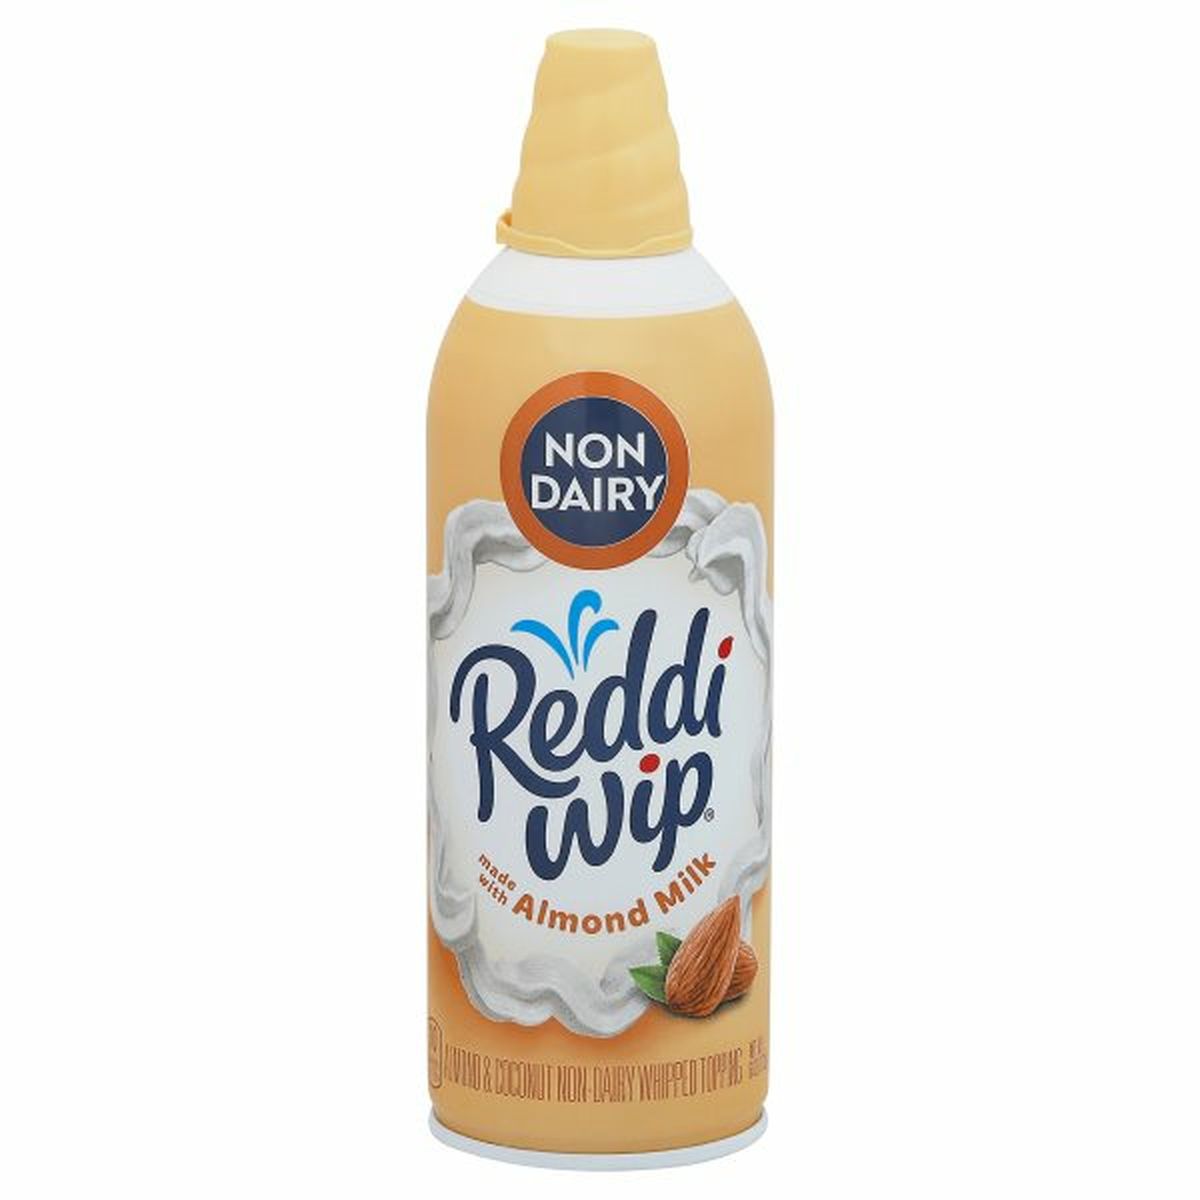 Calories in Reddi-wip Whipped Topping, Non-Dairy, Almond & Coconut